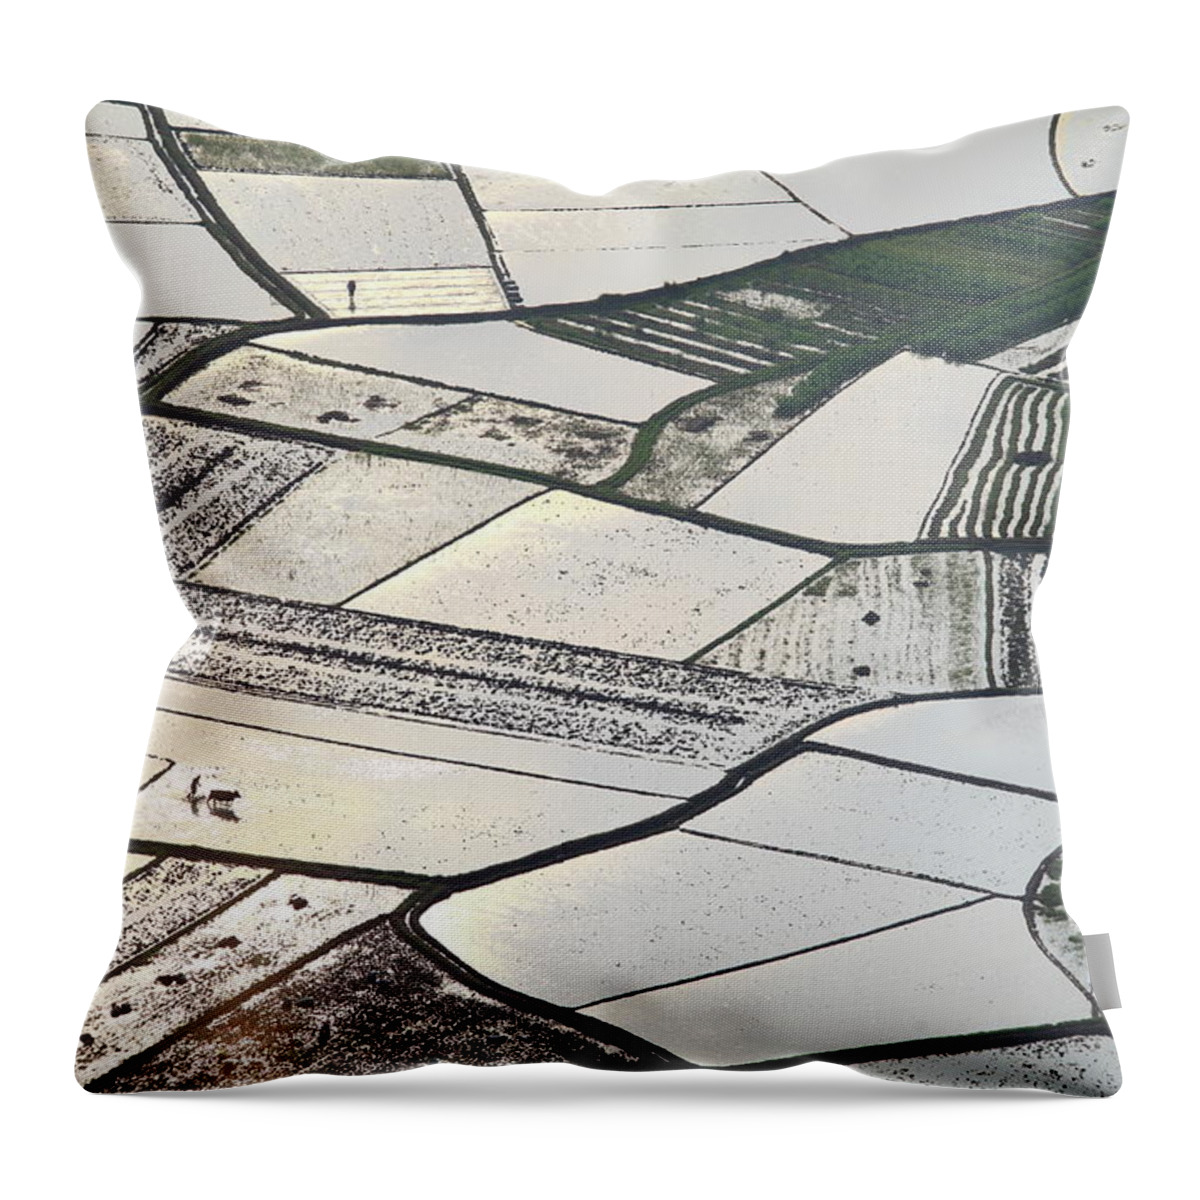 Working Throw Pillow featuring the photograph Farmers Plough Paddy Field by Bihaibo